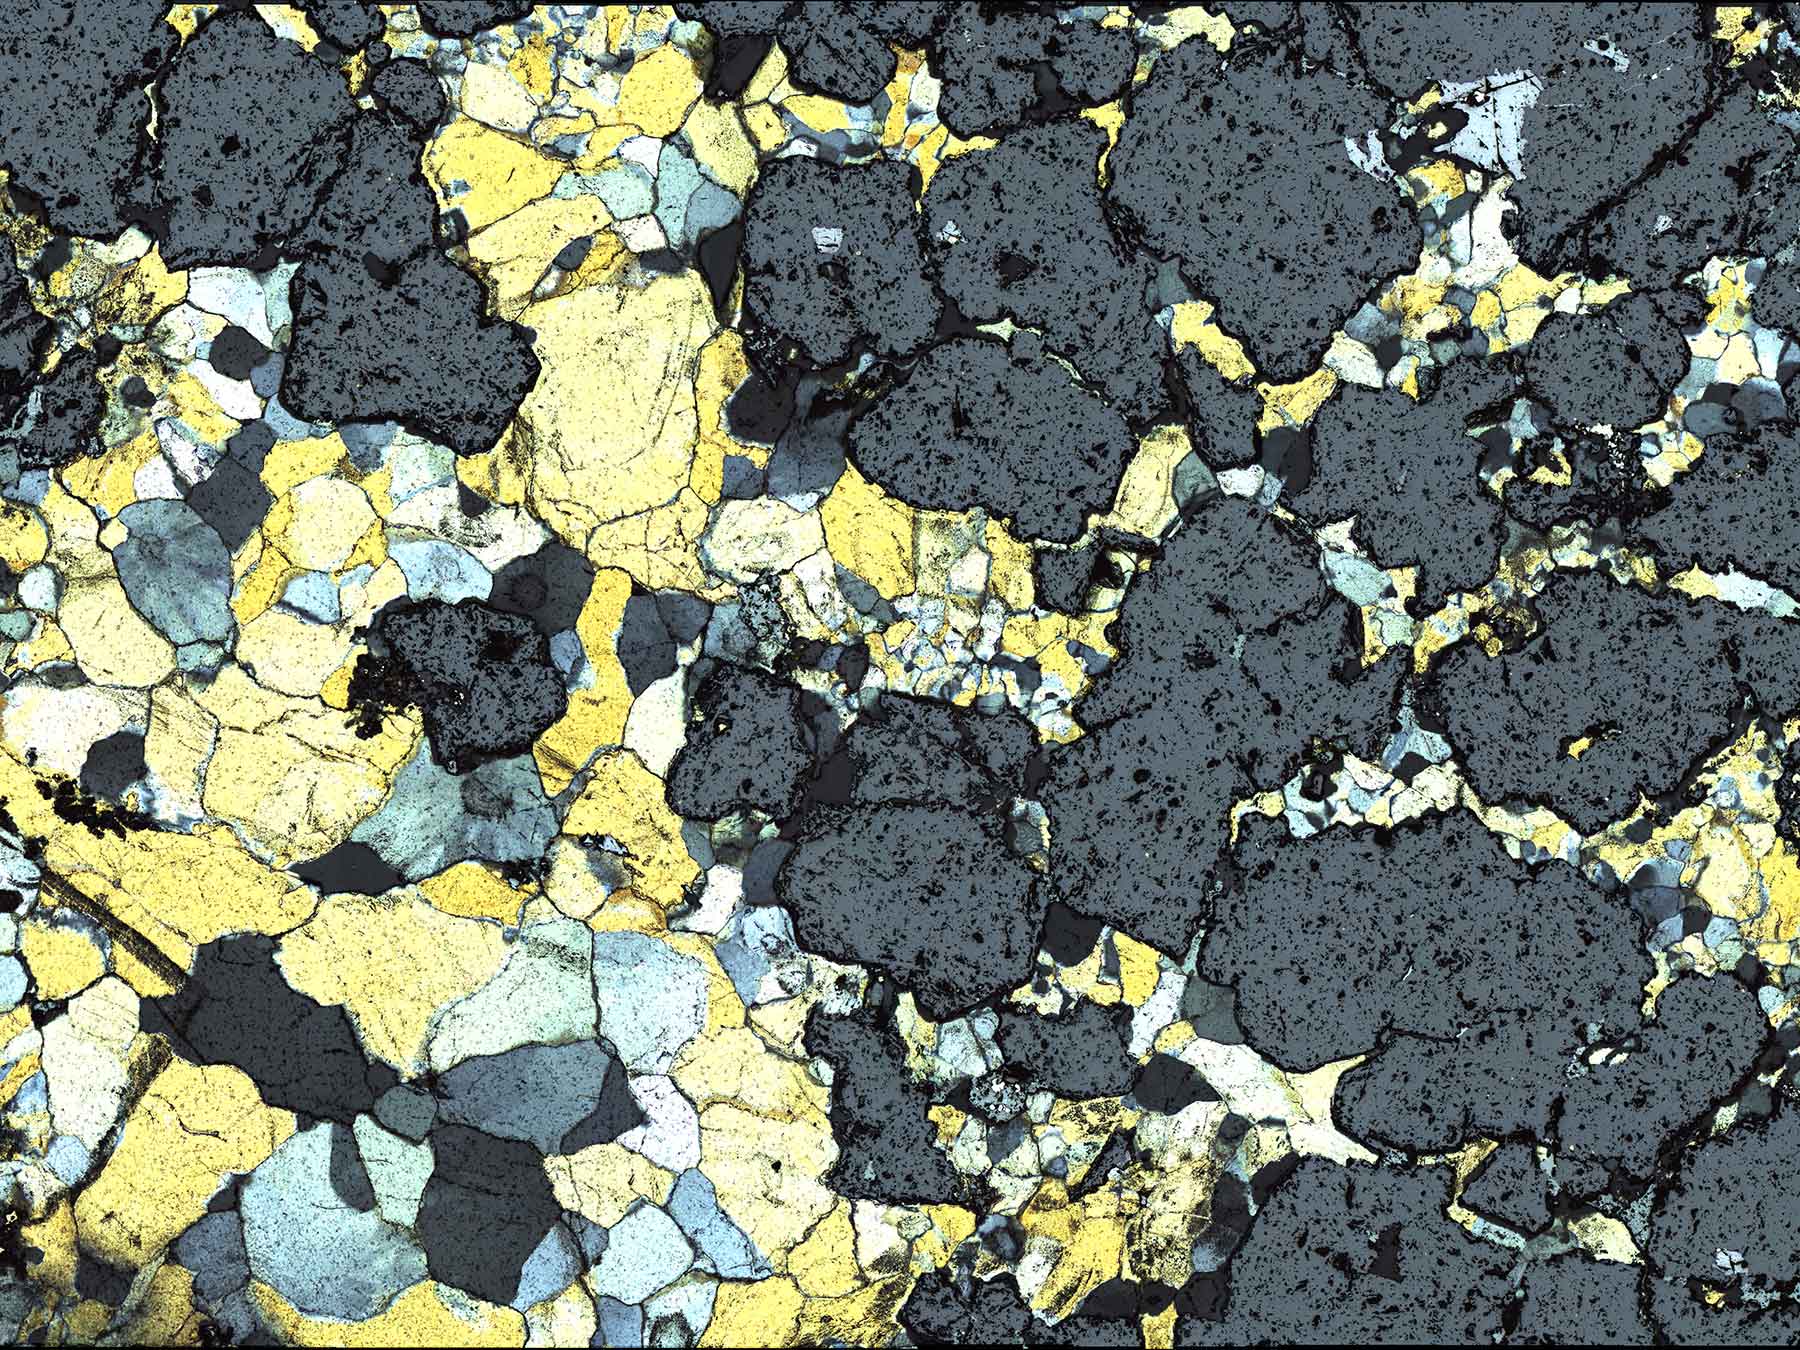 Transmitted light image of a thick section containing opaque minerals, mostly sphalerite, with some galena, and trace chalcopyrite.